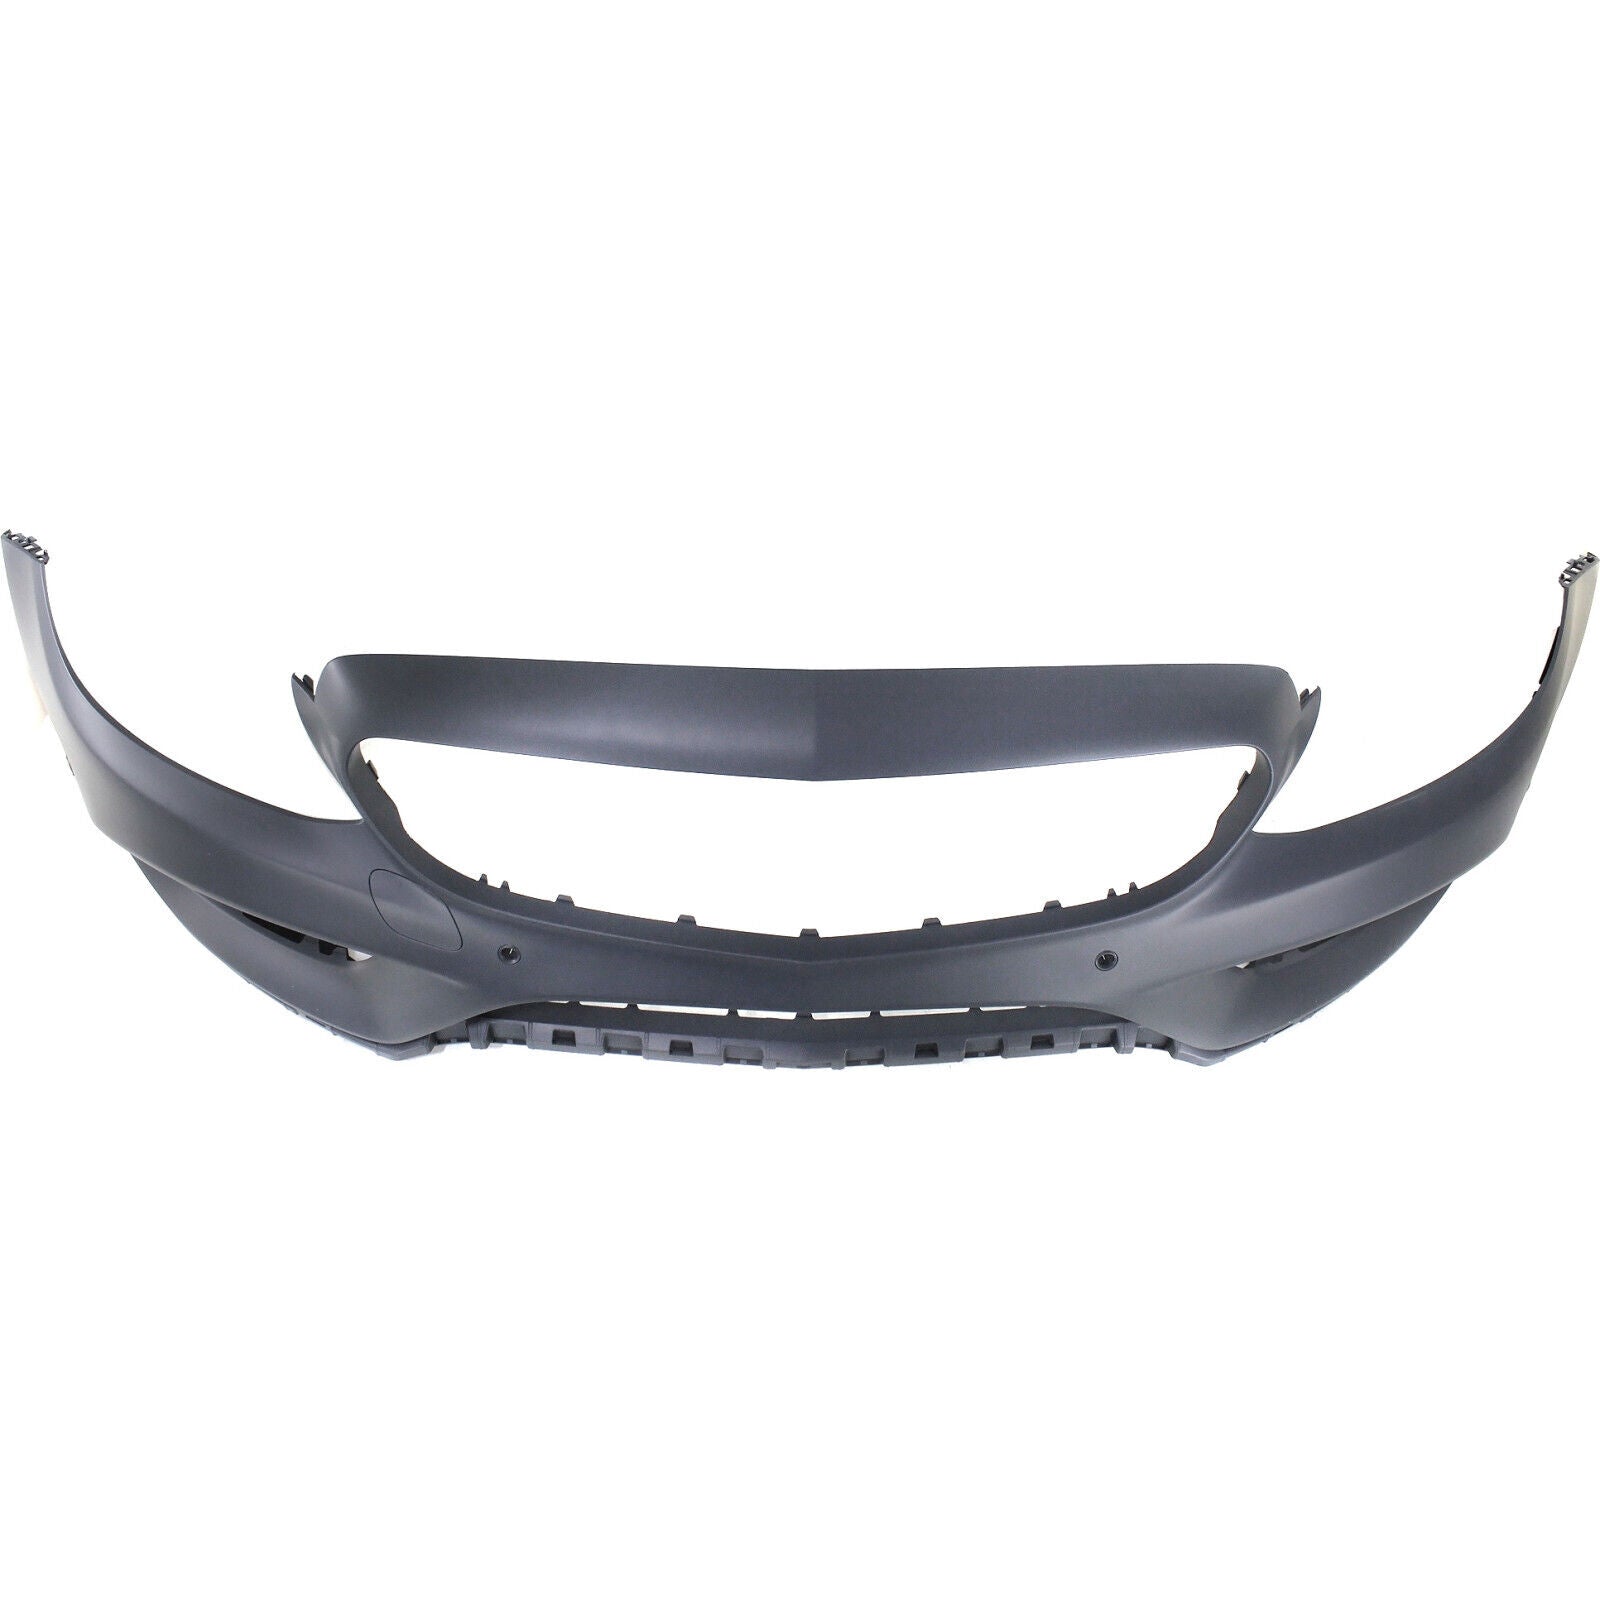 2017-2018 MERCEDES-BENZ C-CLASS; Front Bumper Cover; CONV/A205 w/AMG w/Sport w/o Surround View w/Park Sensor Painted to Match